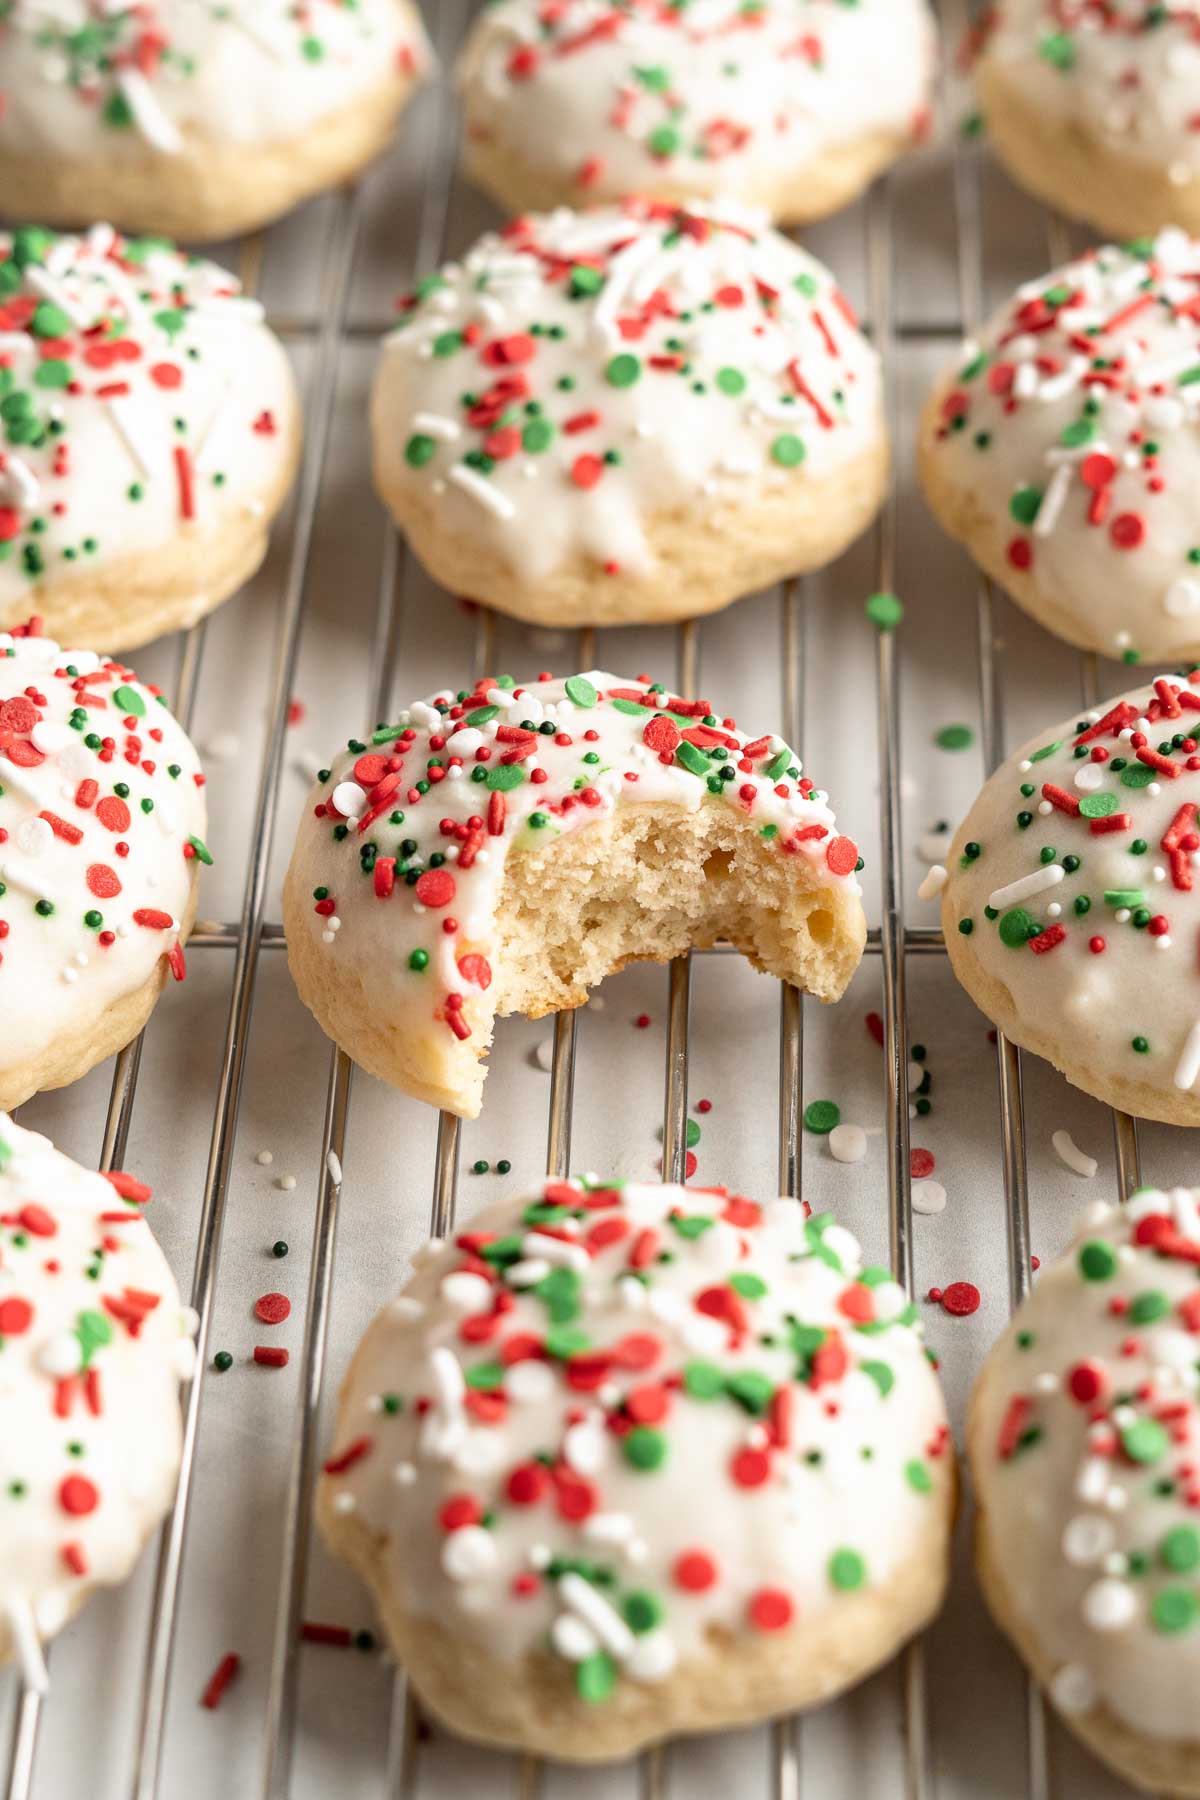 Super moist, soft, and sweet Italian Christmas Cookies (Ricotta Cookies) are easy festive holiday treats that are ready in just 30 minutes! | aheadofthyme.com